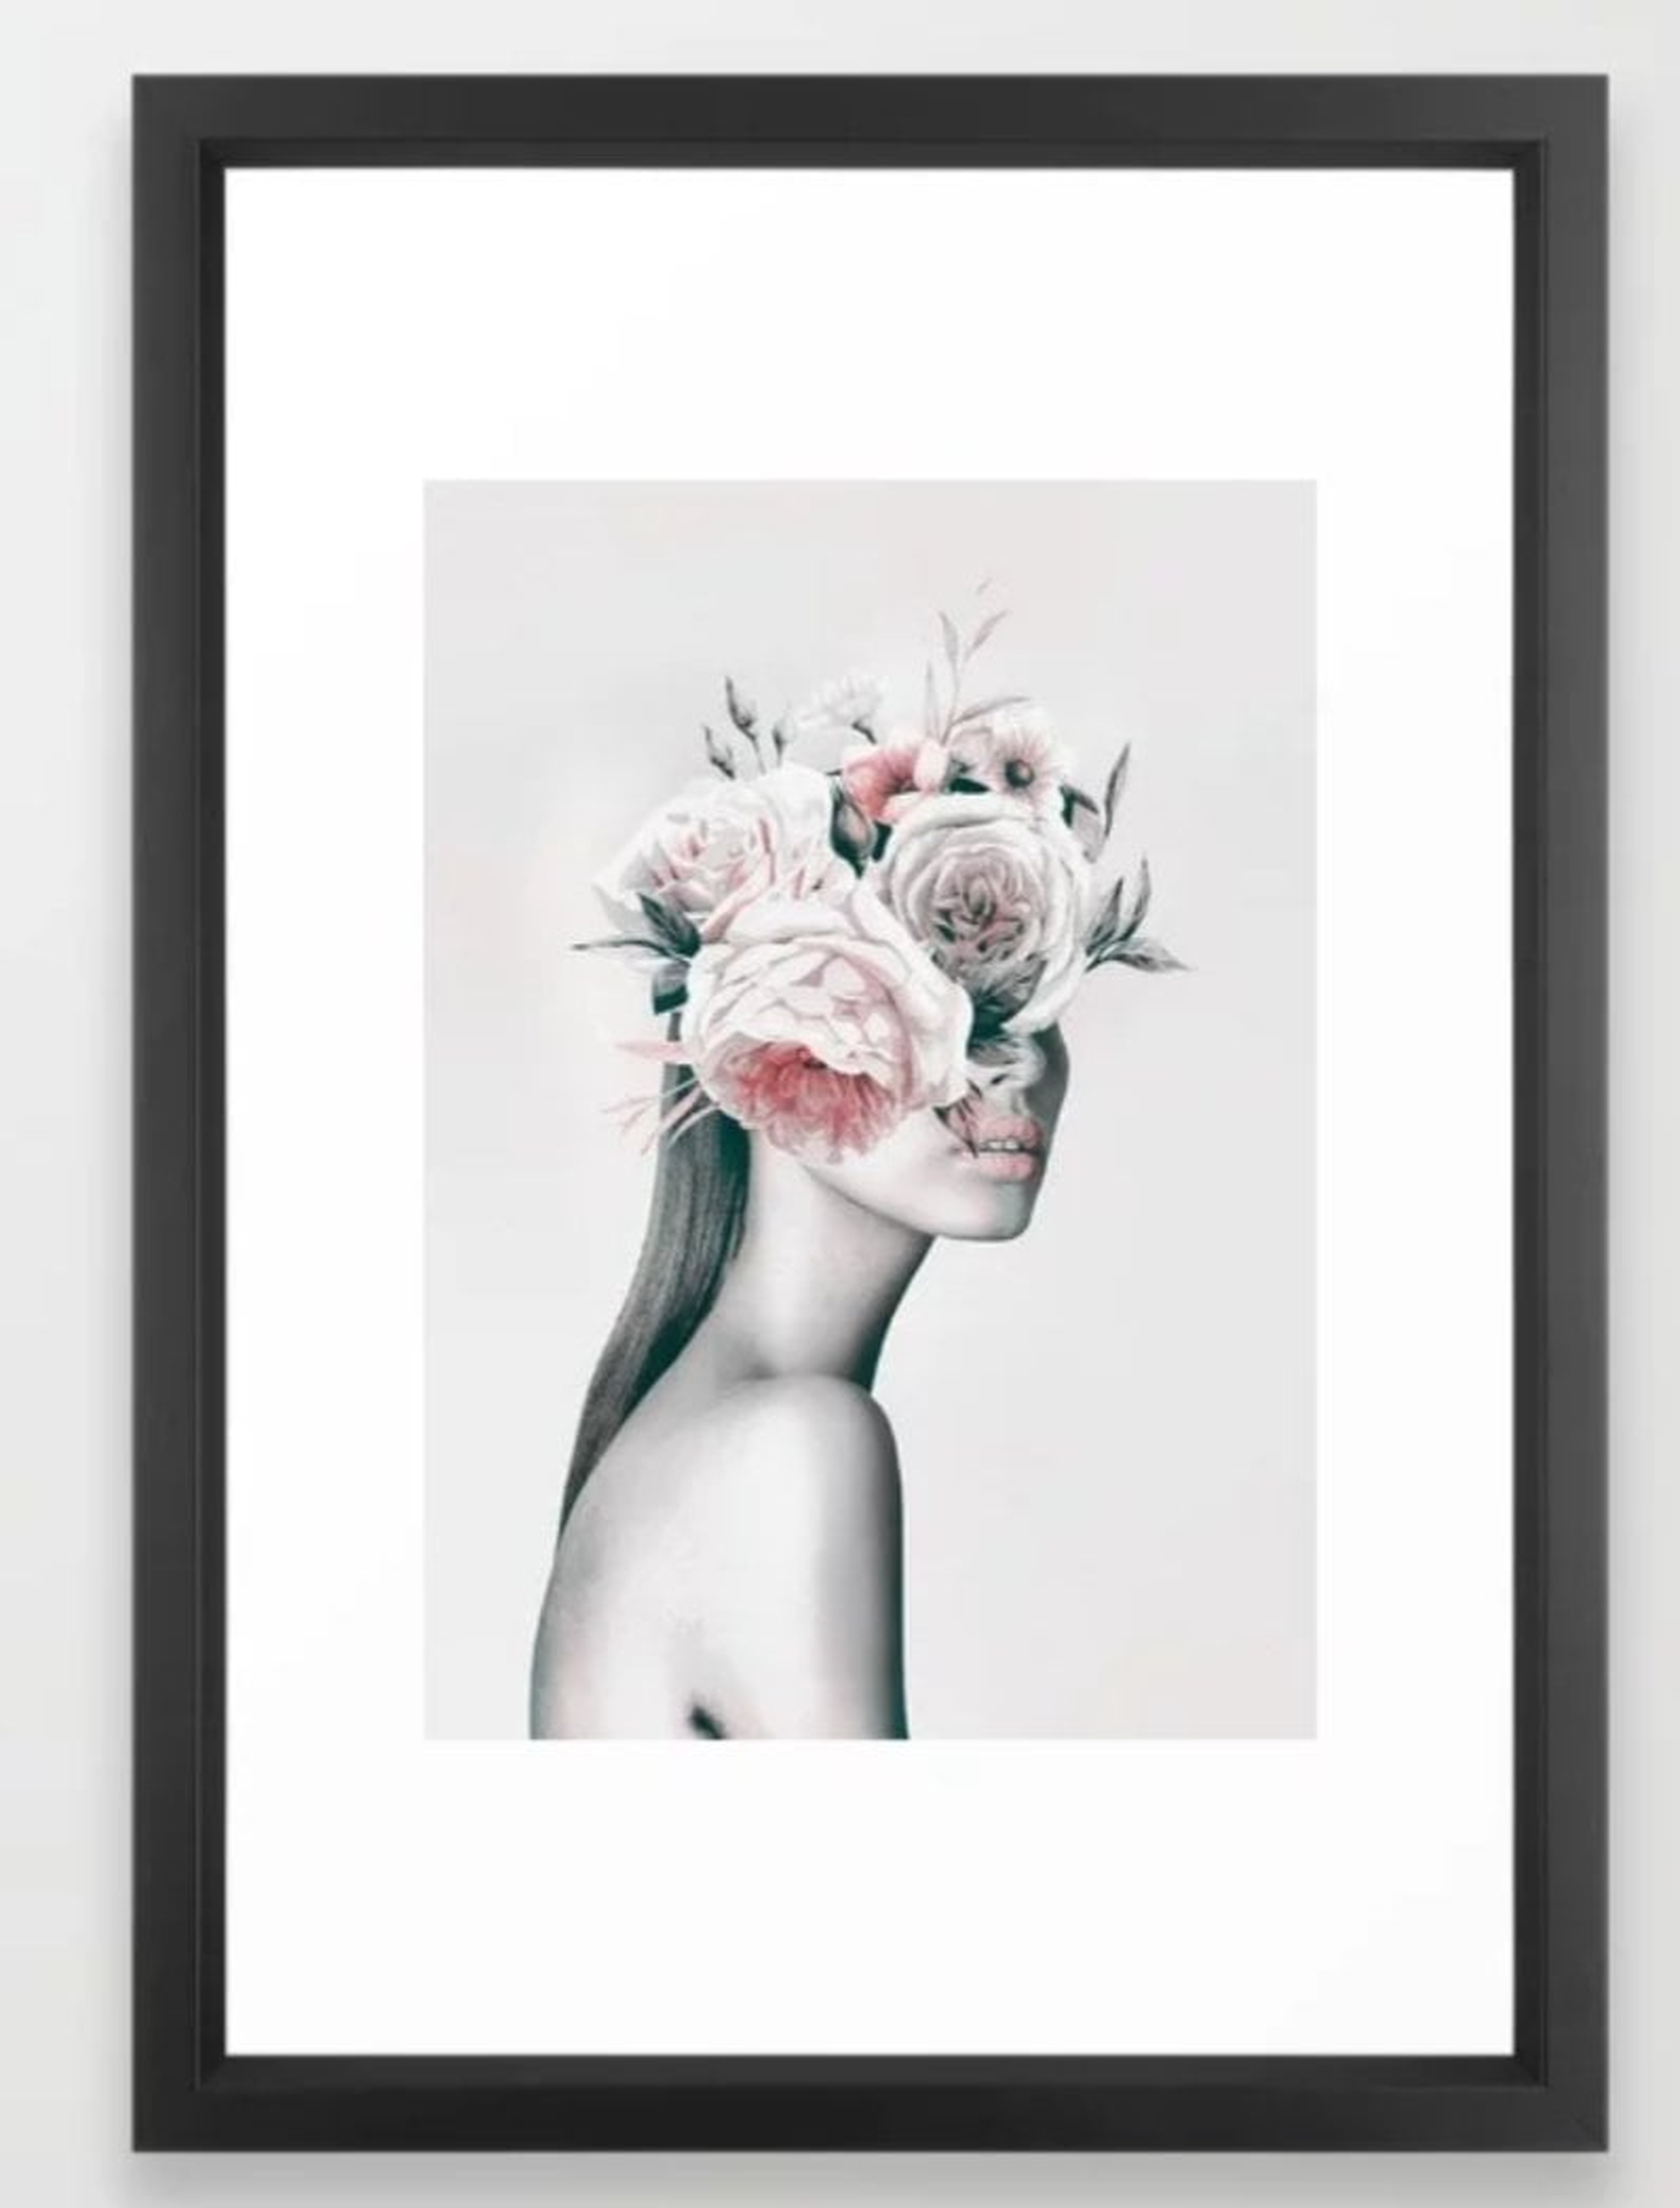 WOMAN WITH FLOWERS 11 Framed Art Print 15x21 - Society6